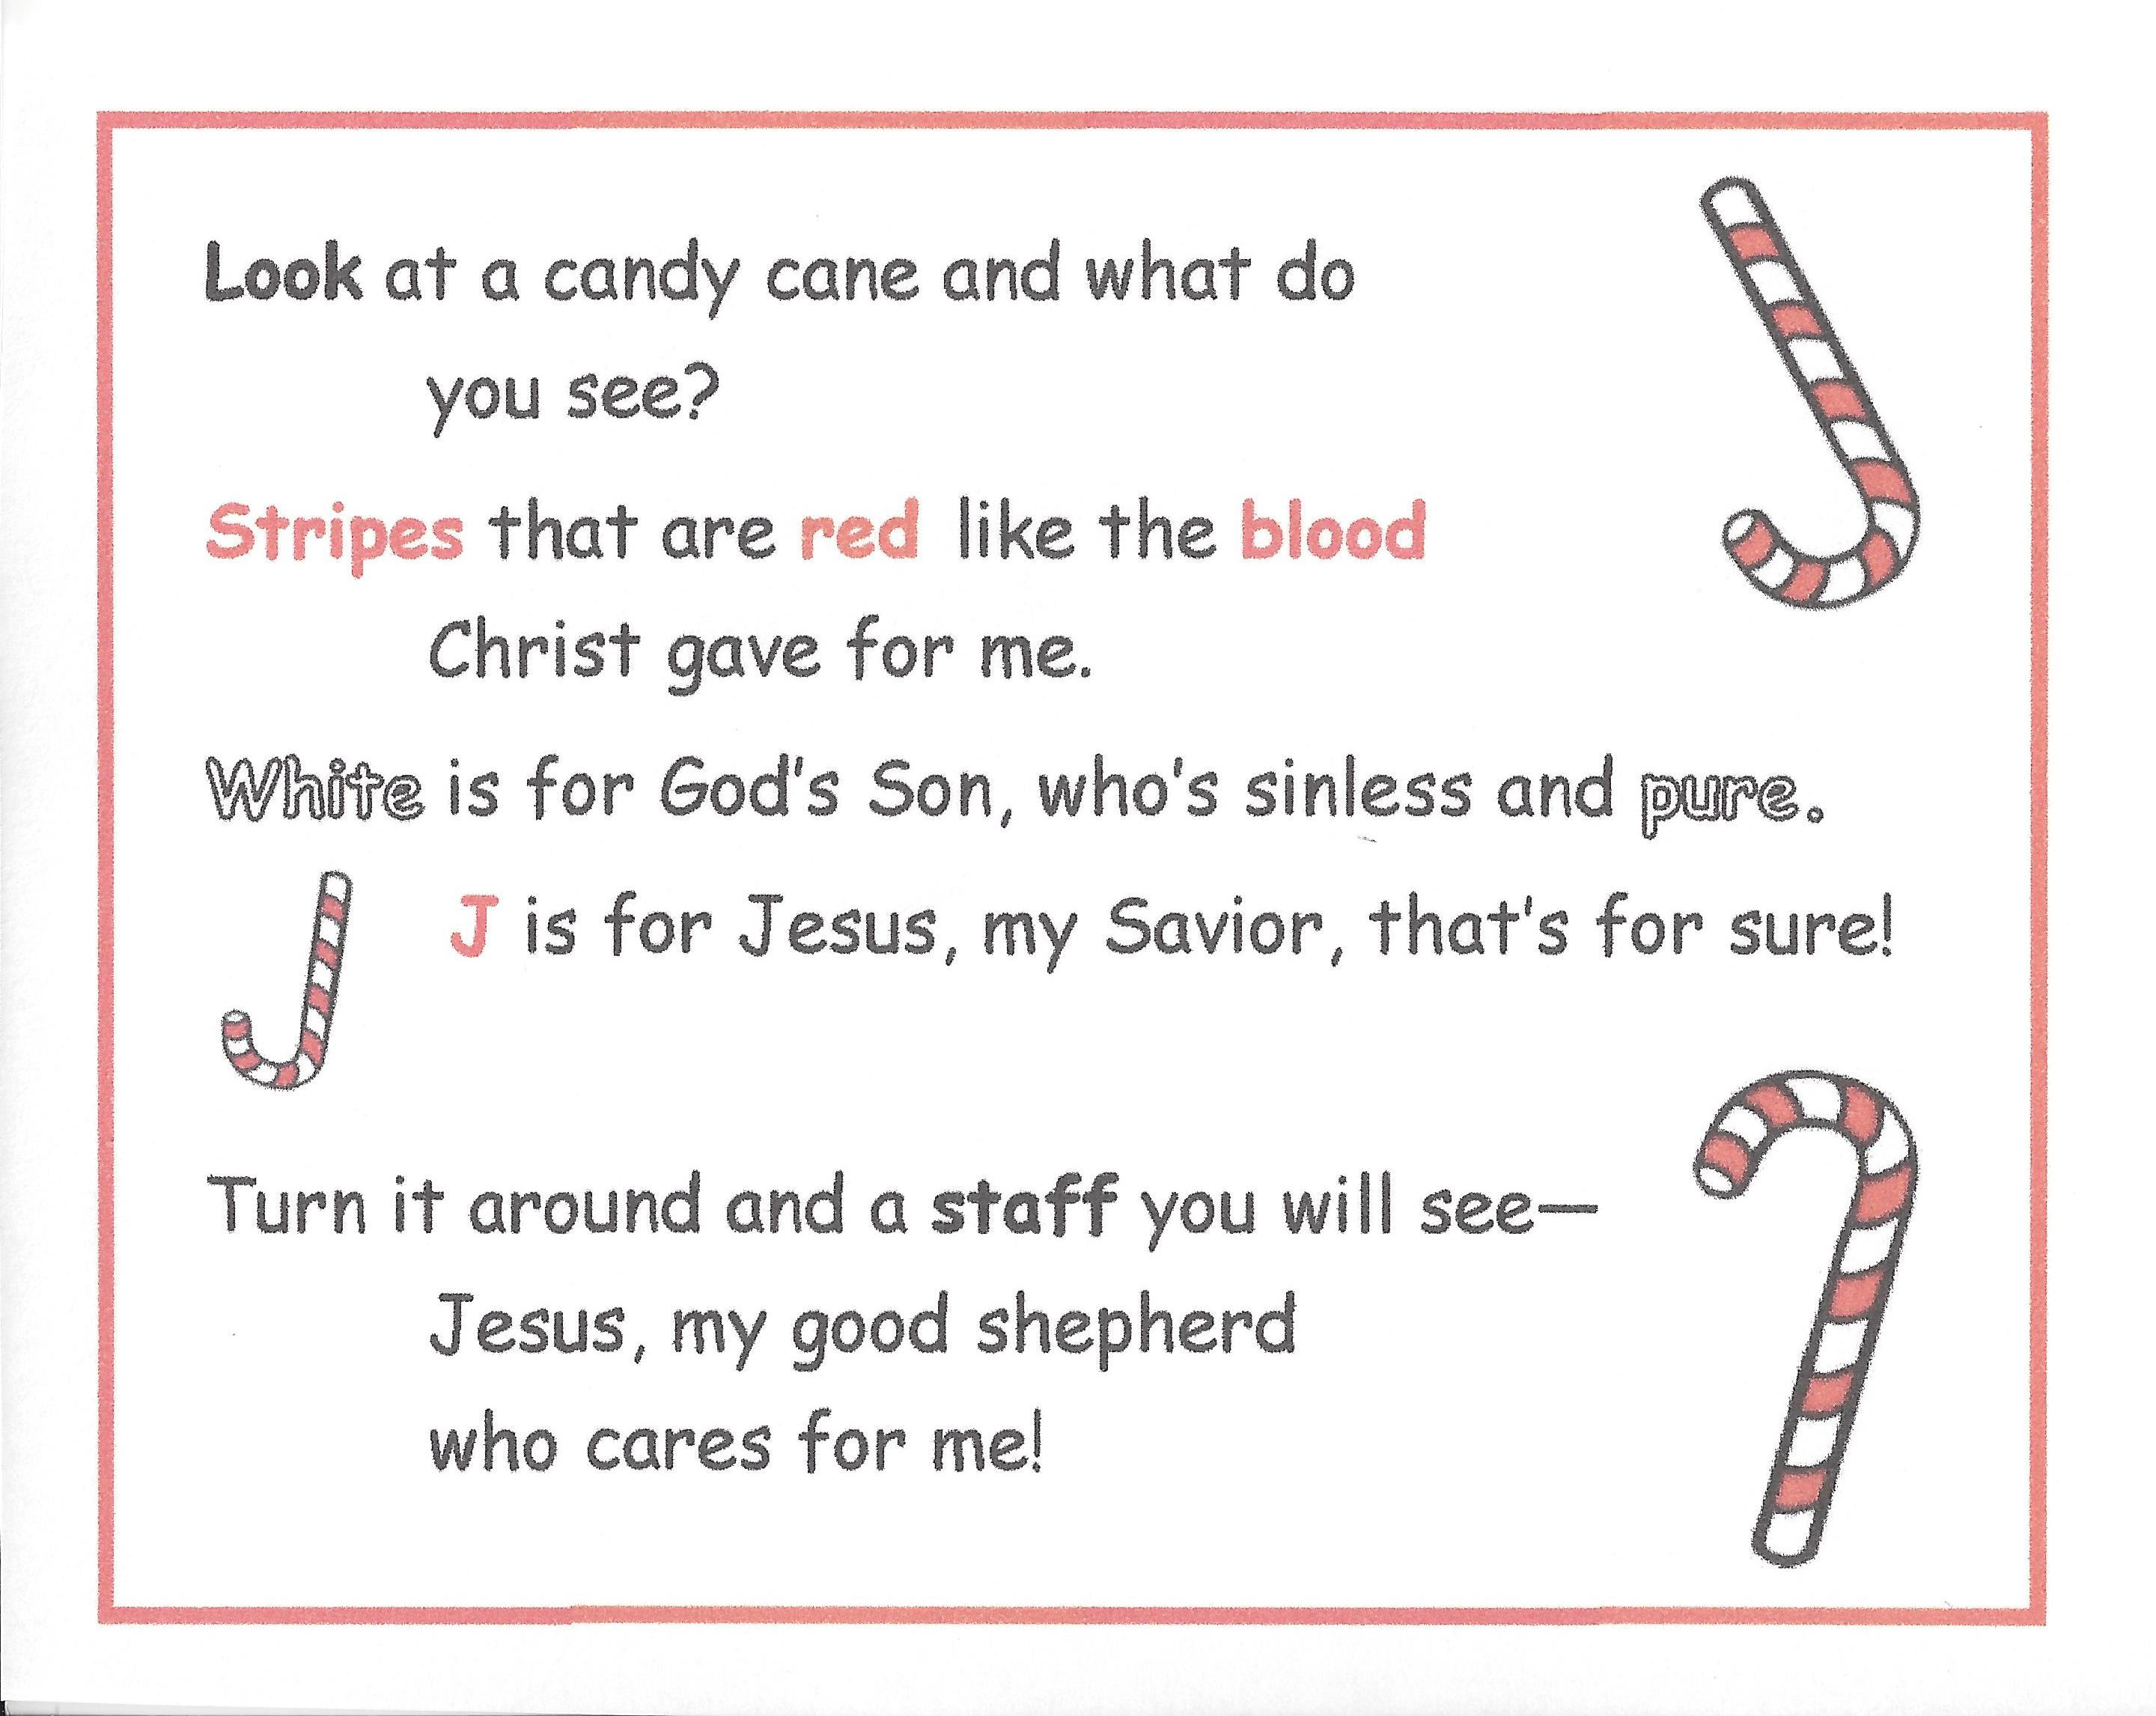 Free Candy Cane Poem For You | Wee Can Know - Free Printable Candy Cane Poem